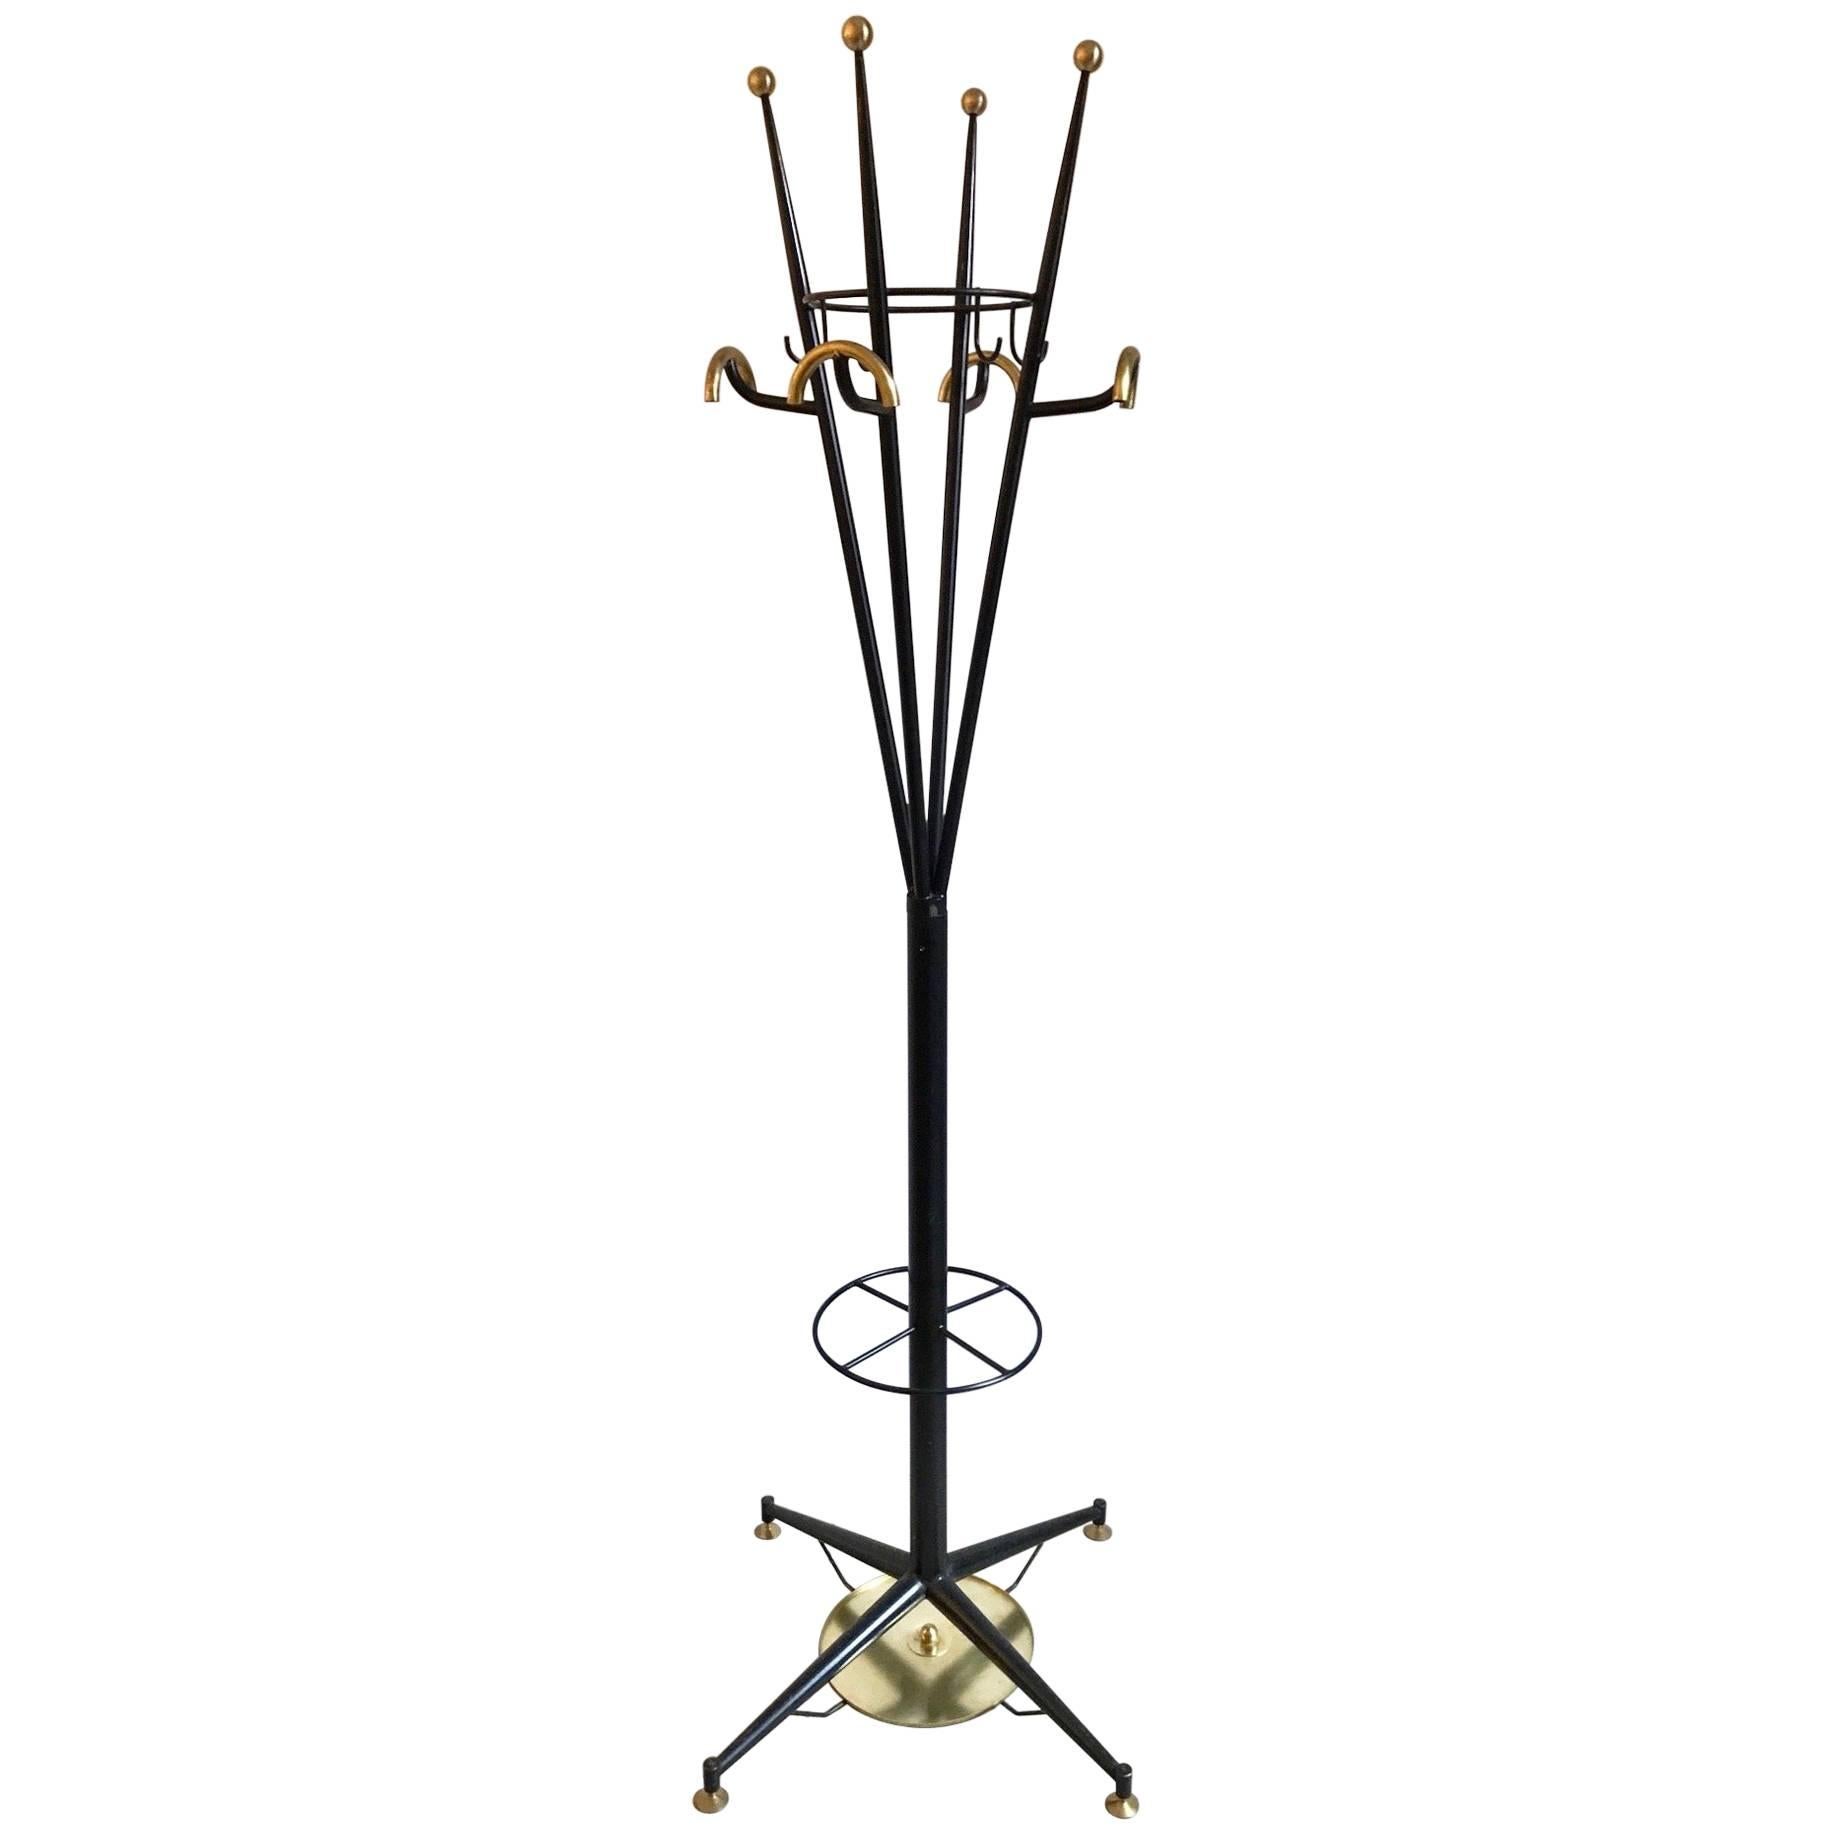 1980s Italian Modern Black Lacquered and Gold Brass Coat Rack or Umbrella Stand